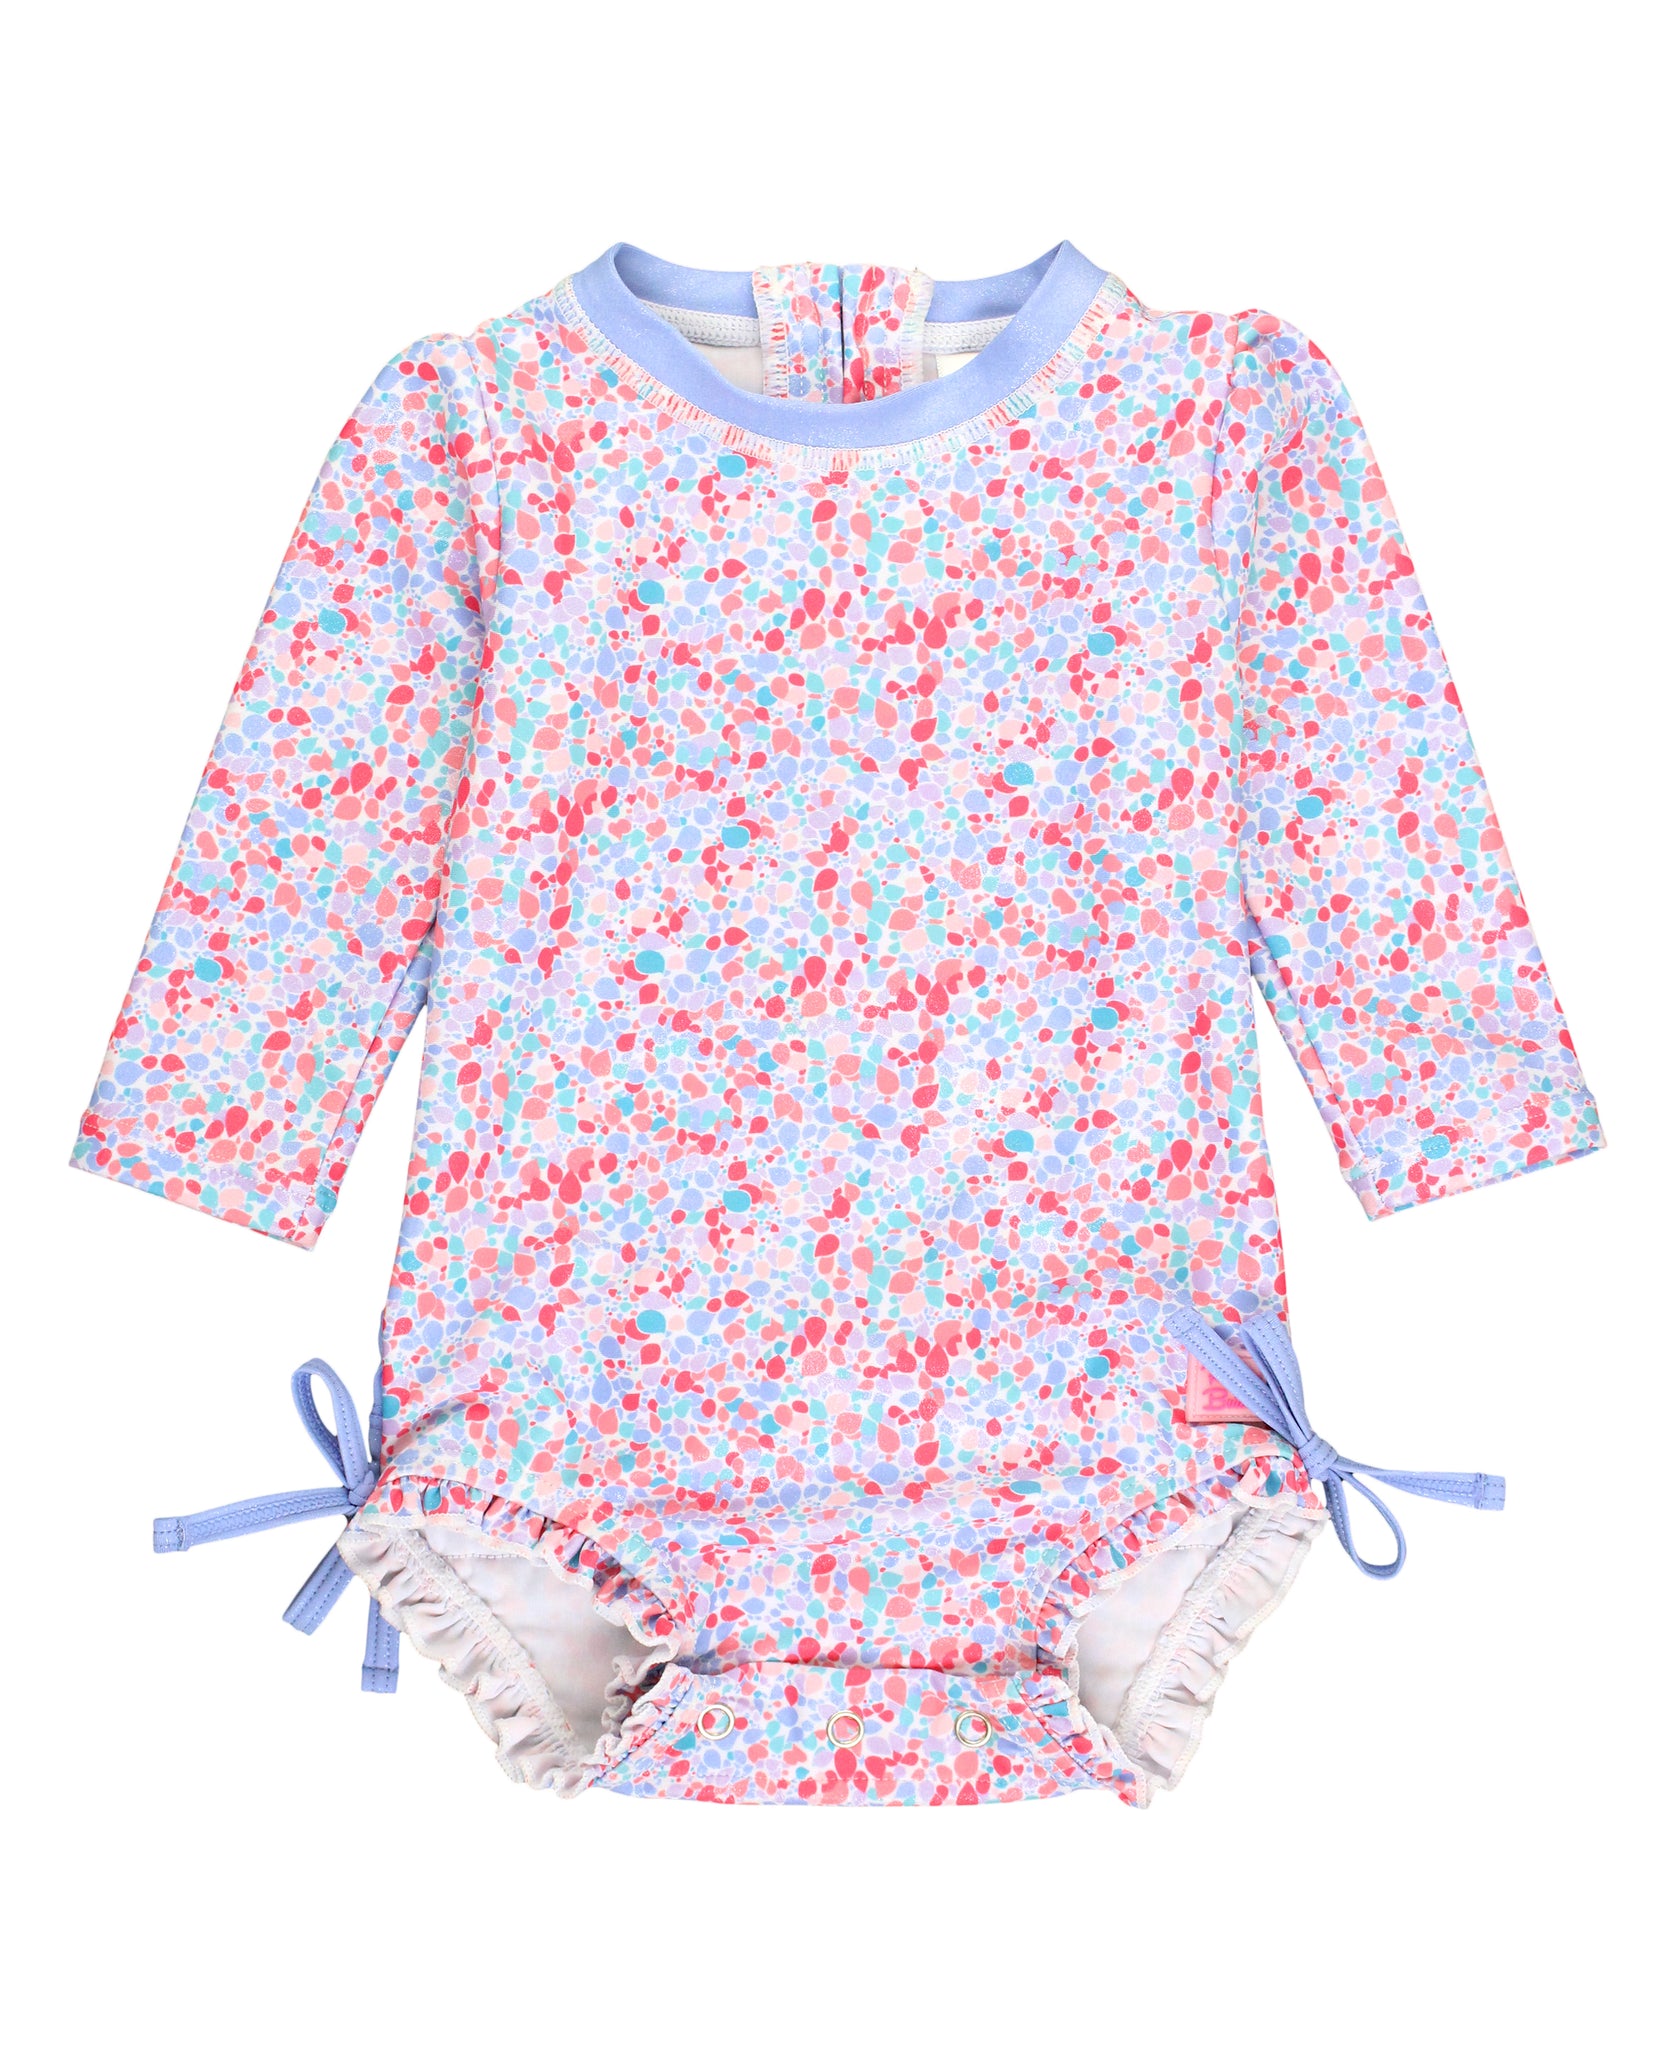 pink and periwinkle abstract print long sleeve girl rashguard with ruffle leg opening